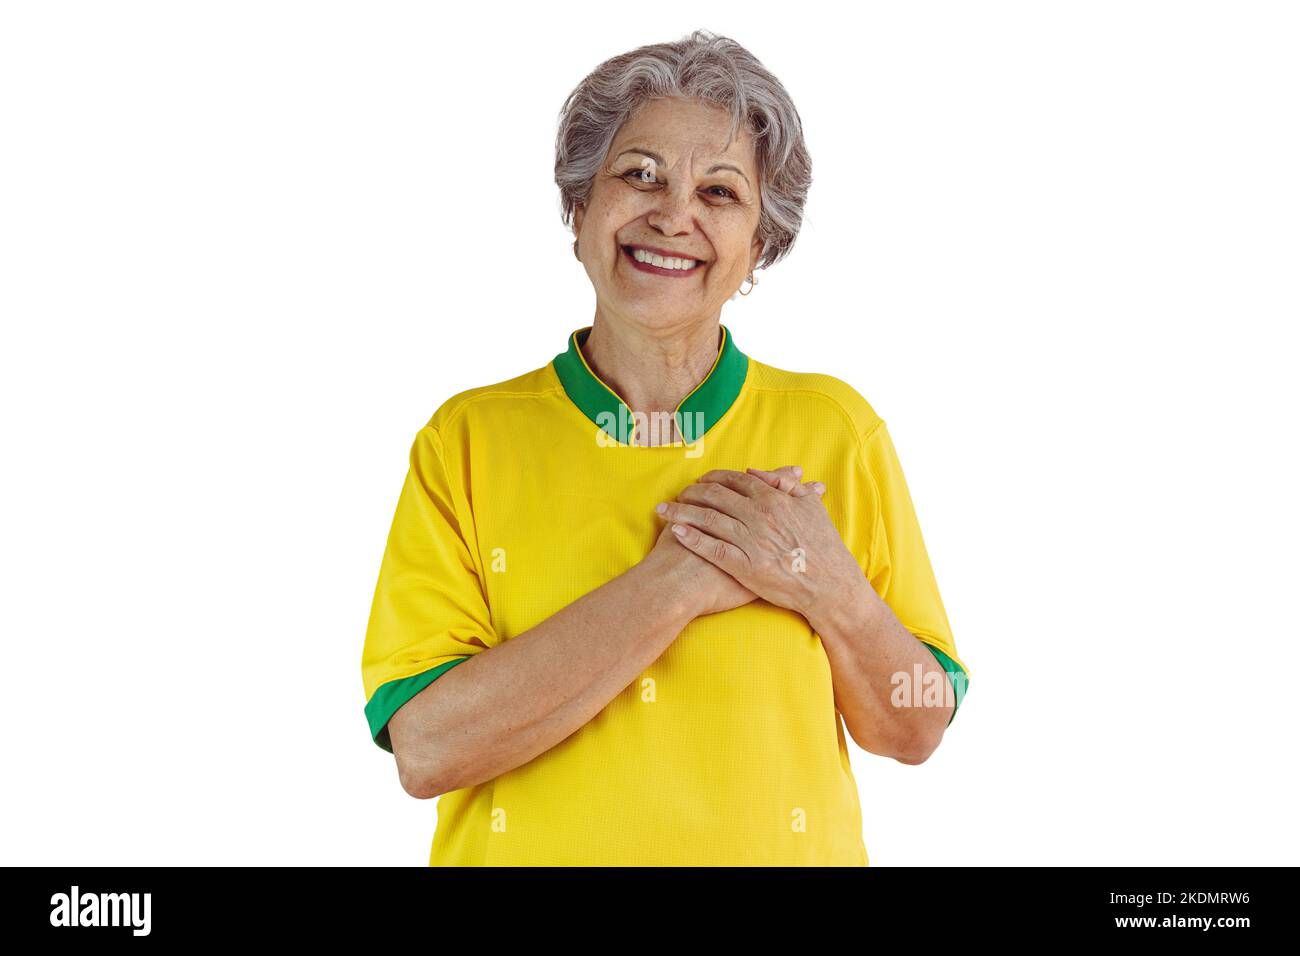 Mature Woman with Soccer Team Yellow Shirt Isolated on White. Sport Fan With Flag Celebrating the Cup. Stock Photo